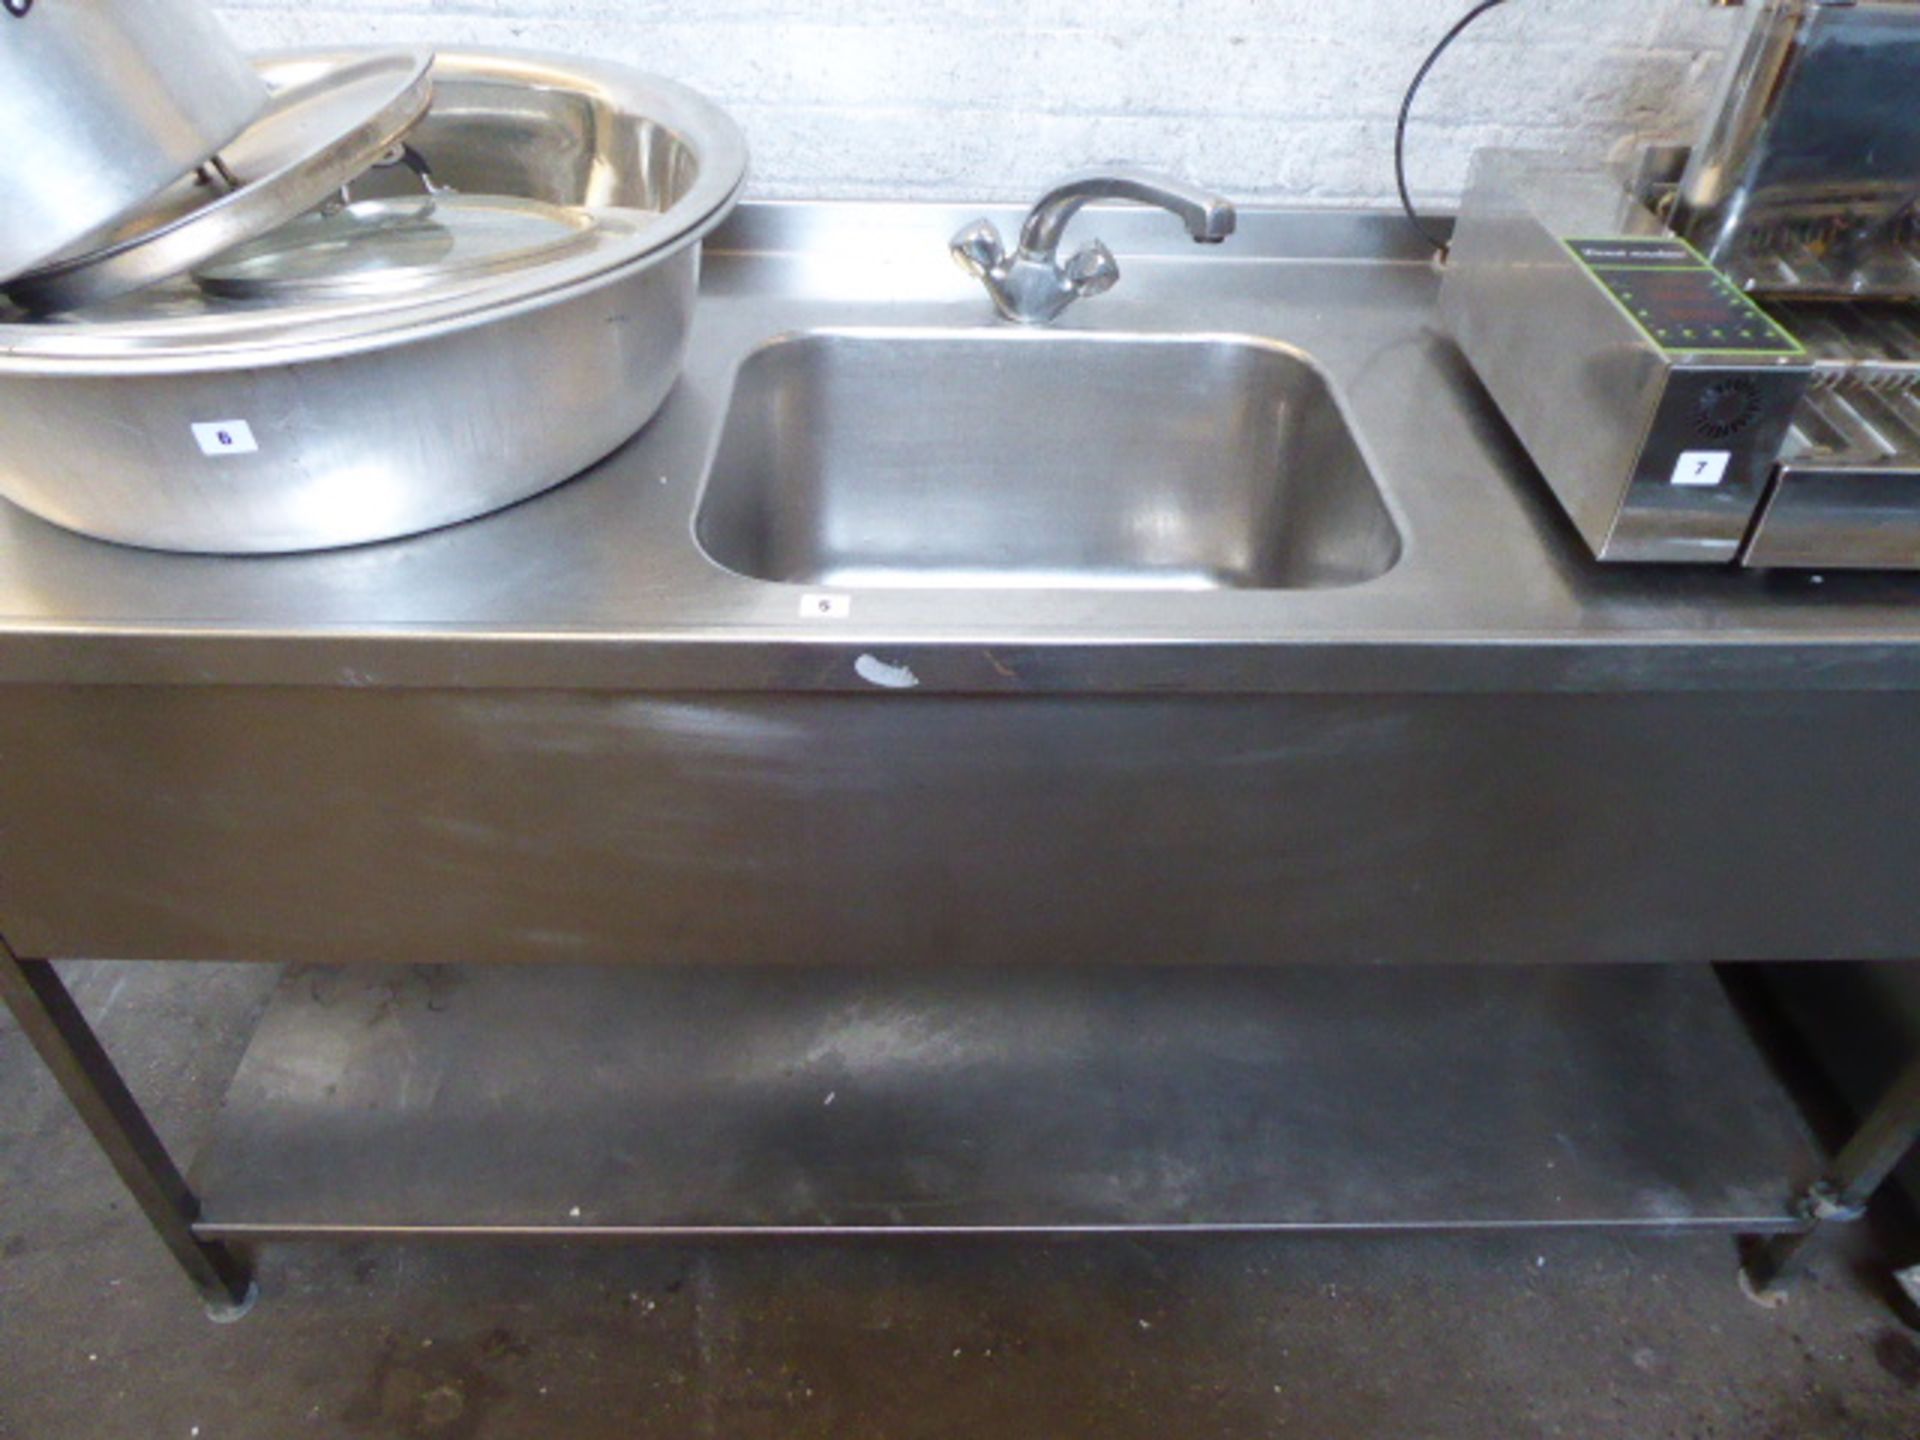 240cm stainless steel single bowl sink with taps, draining board and shelf under - Image 2 of 2